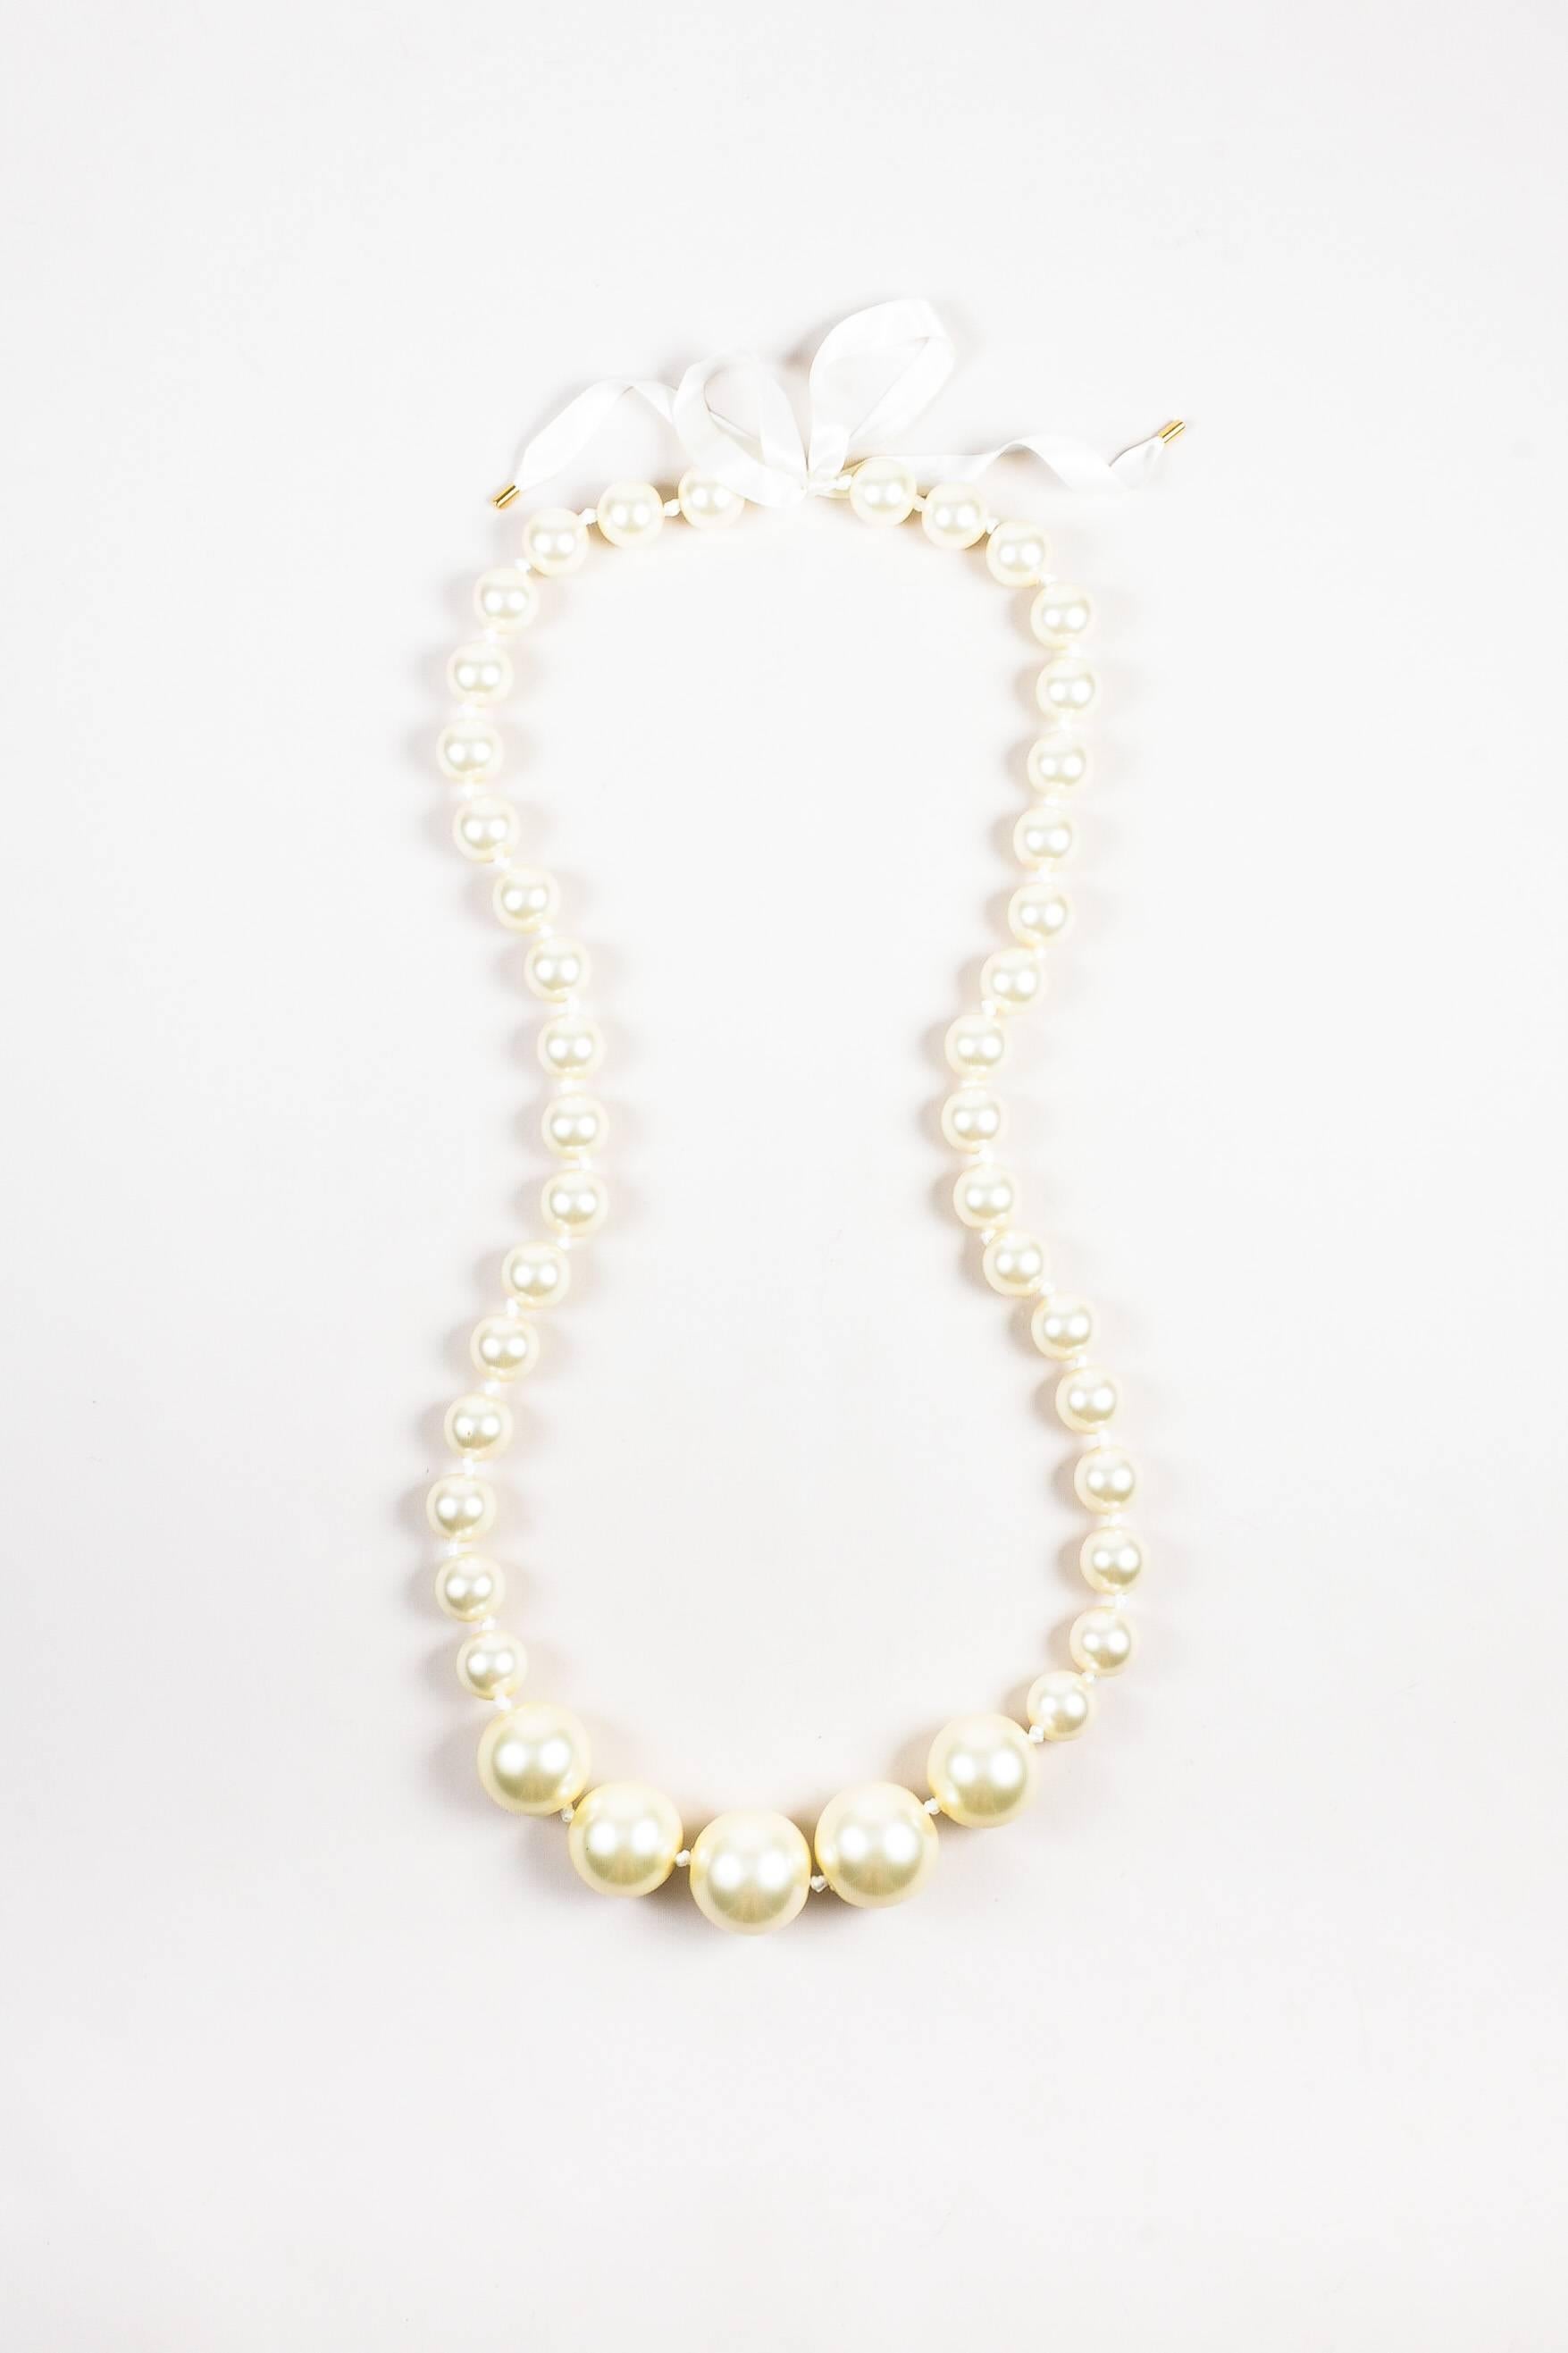 From the Louis Vuitton Fall 2006 Runway collection, this stunning statement pearl necklace features oversized, chunky faux pearl beads strung on white satin ribbon. Long length allows you to wear this single, double, or triple-layered. Self-tie